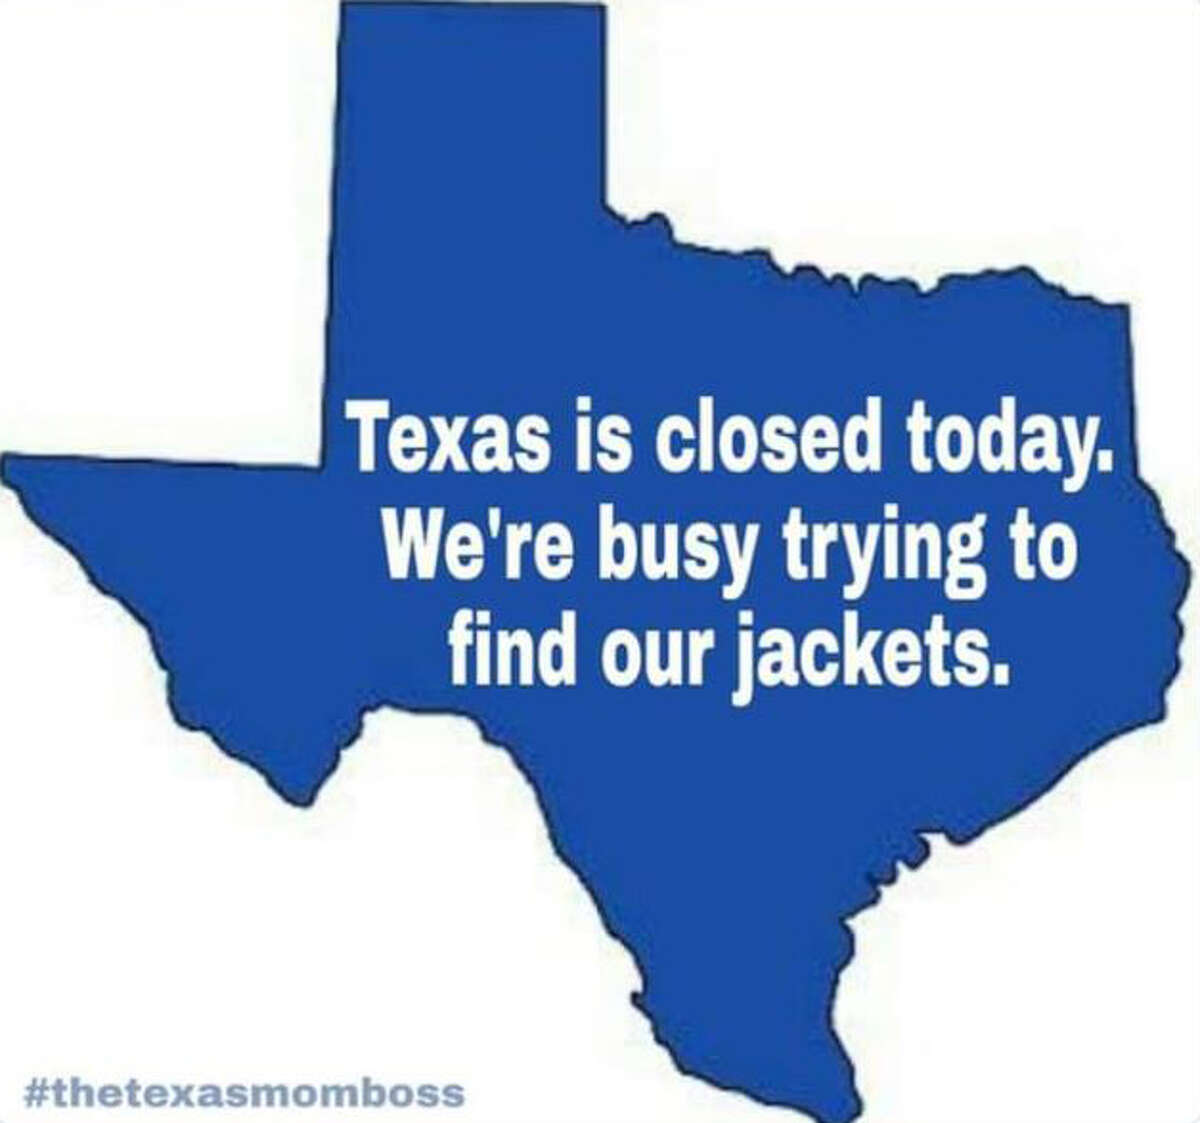 Memes that hilariously capture the essence of Texas' neurotic weather